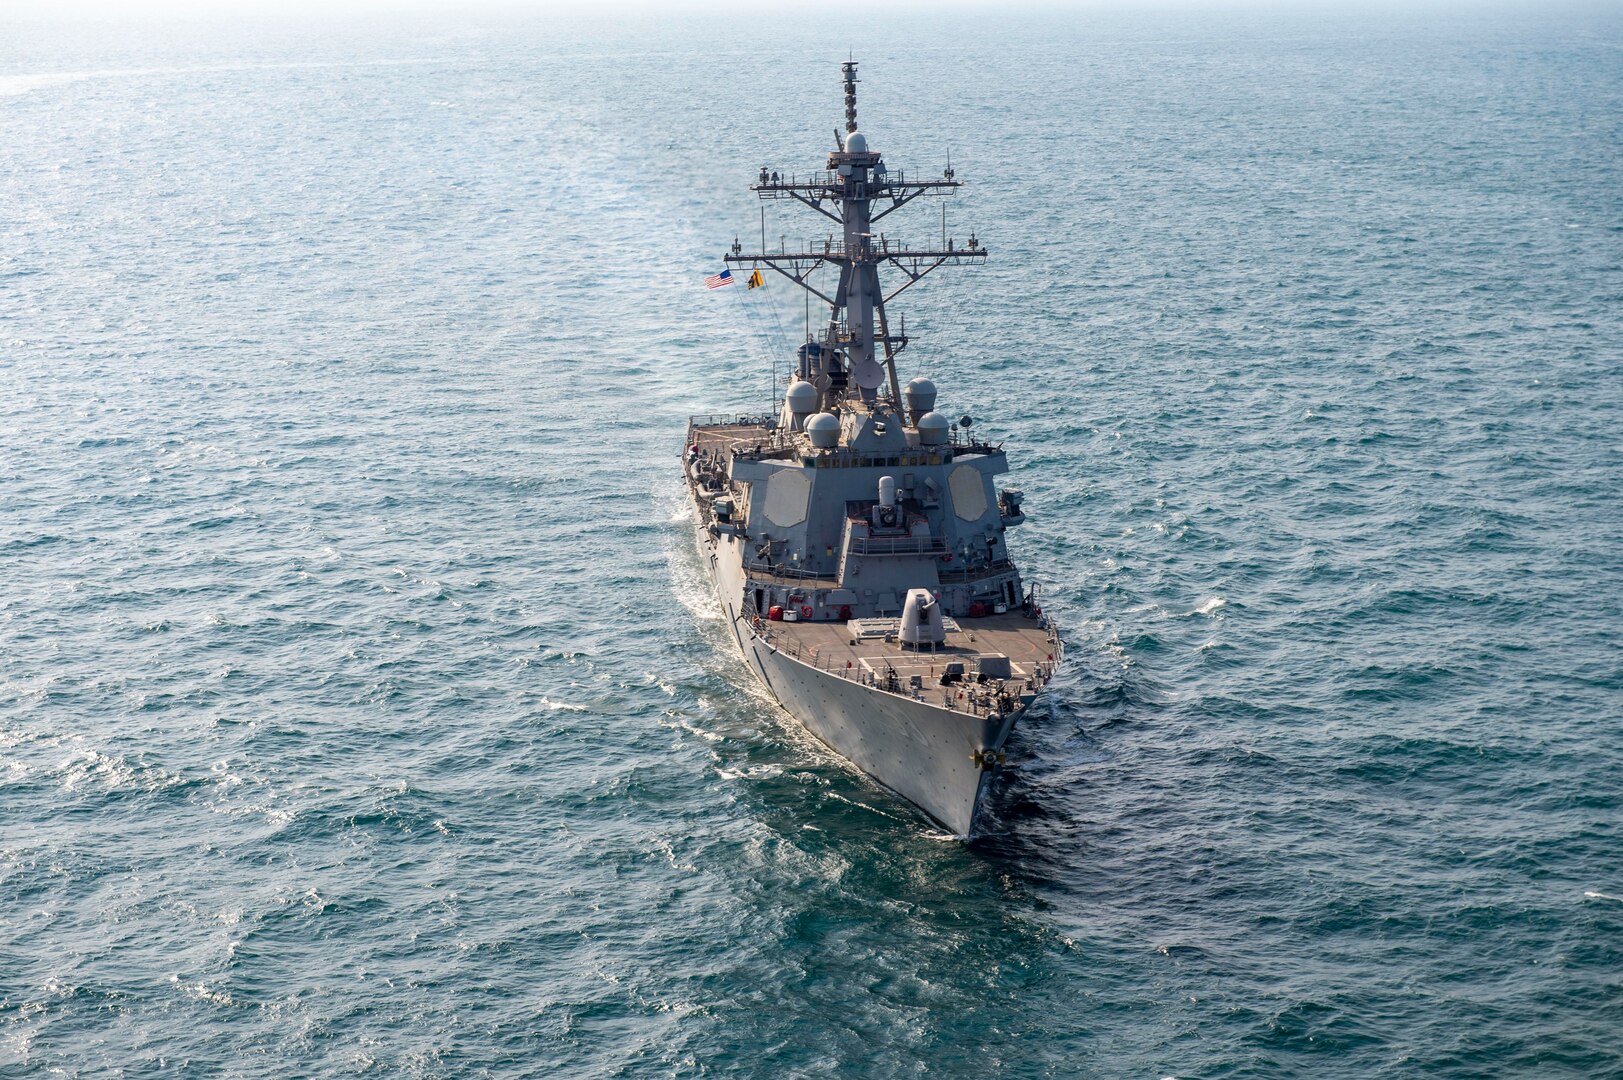 210124-N-XG173-1498 ARABIAN GULF (Jan. 24, 2020) Guided-missile destroyer USS John Paul Jones (DDG 53) sails in formation during exercise Nautical Defender (ND) 21 in the Arabian Gulf, Jan. 24. ND 21 is the capstone in a series of multi-national maritime security exercises designed to broaden levels of cooperation, support long-term regional security, and enhance military-to-military interoperability between the Kingdom of Saudi Arabia, UK and the U.S. (U.S. Navy photo by Mass Communication Specialist 2nd Class Aja Bleu Jackson)